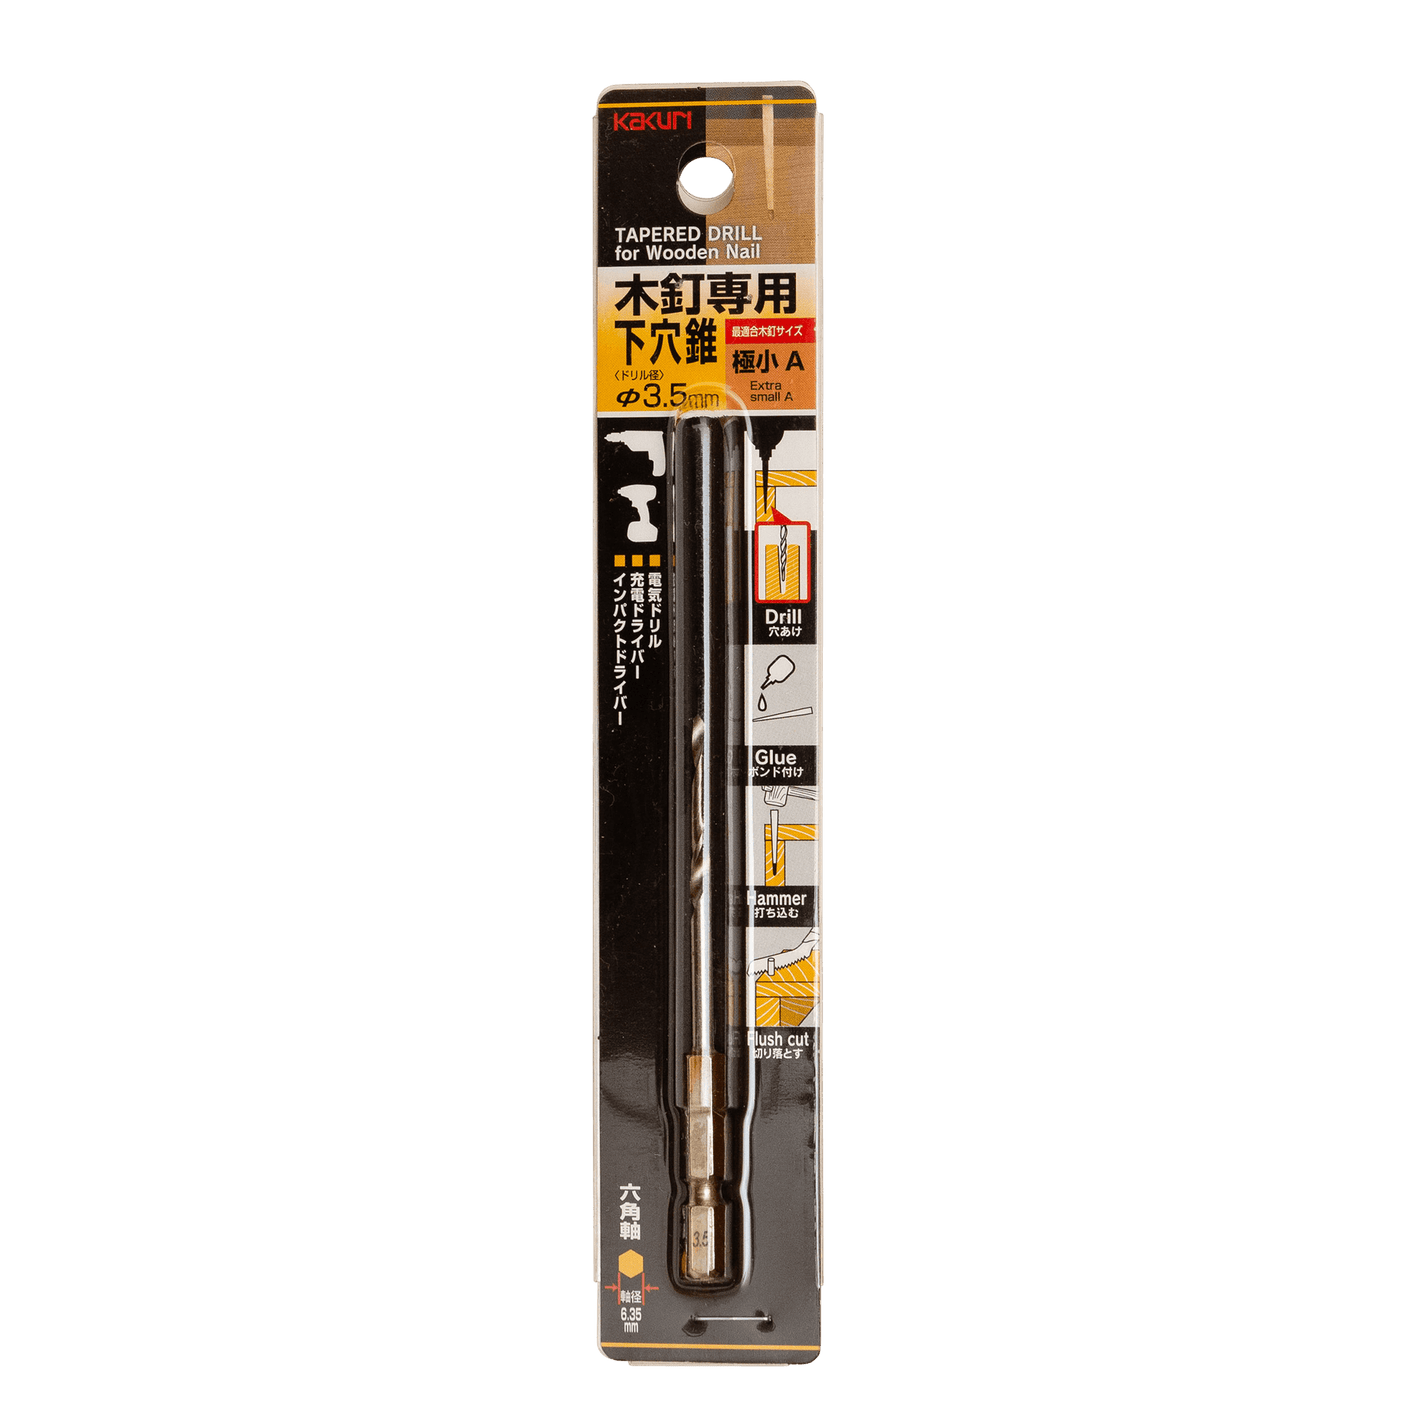 Tapered Drill Bit - Extra Small 3.5mm - Wooden Nails - Japanese Tools Australia